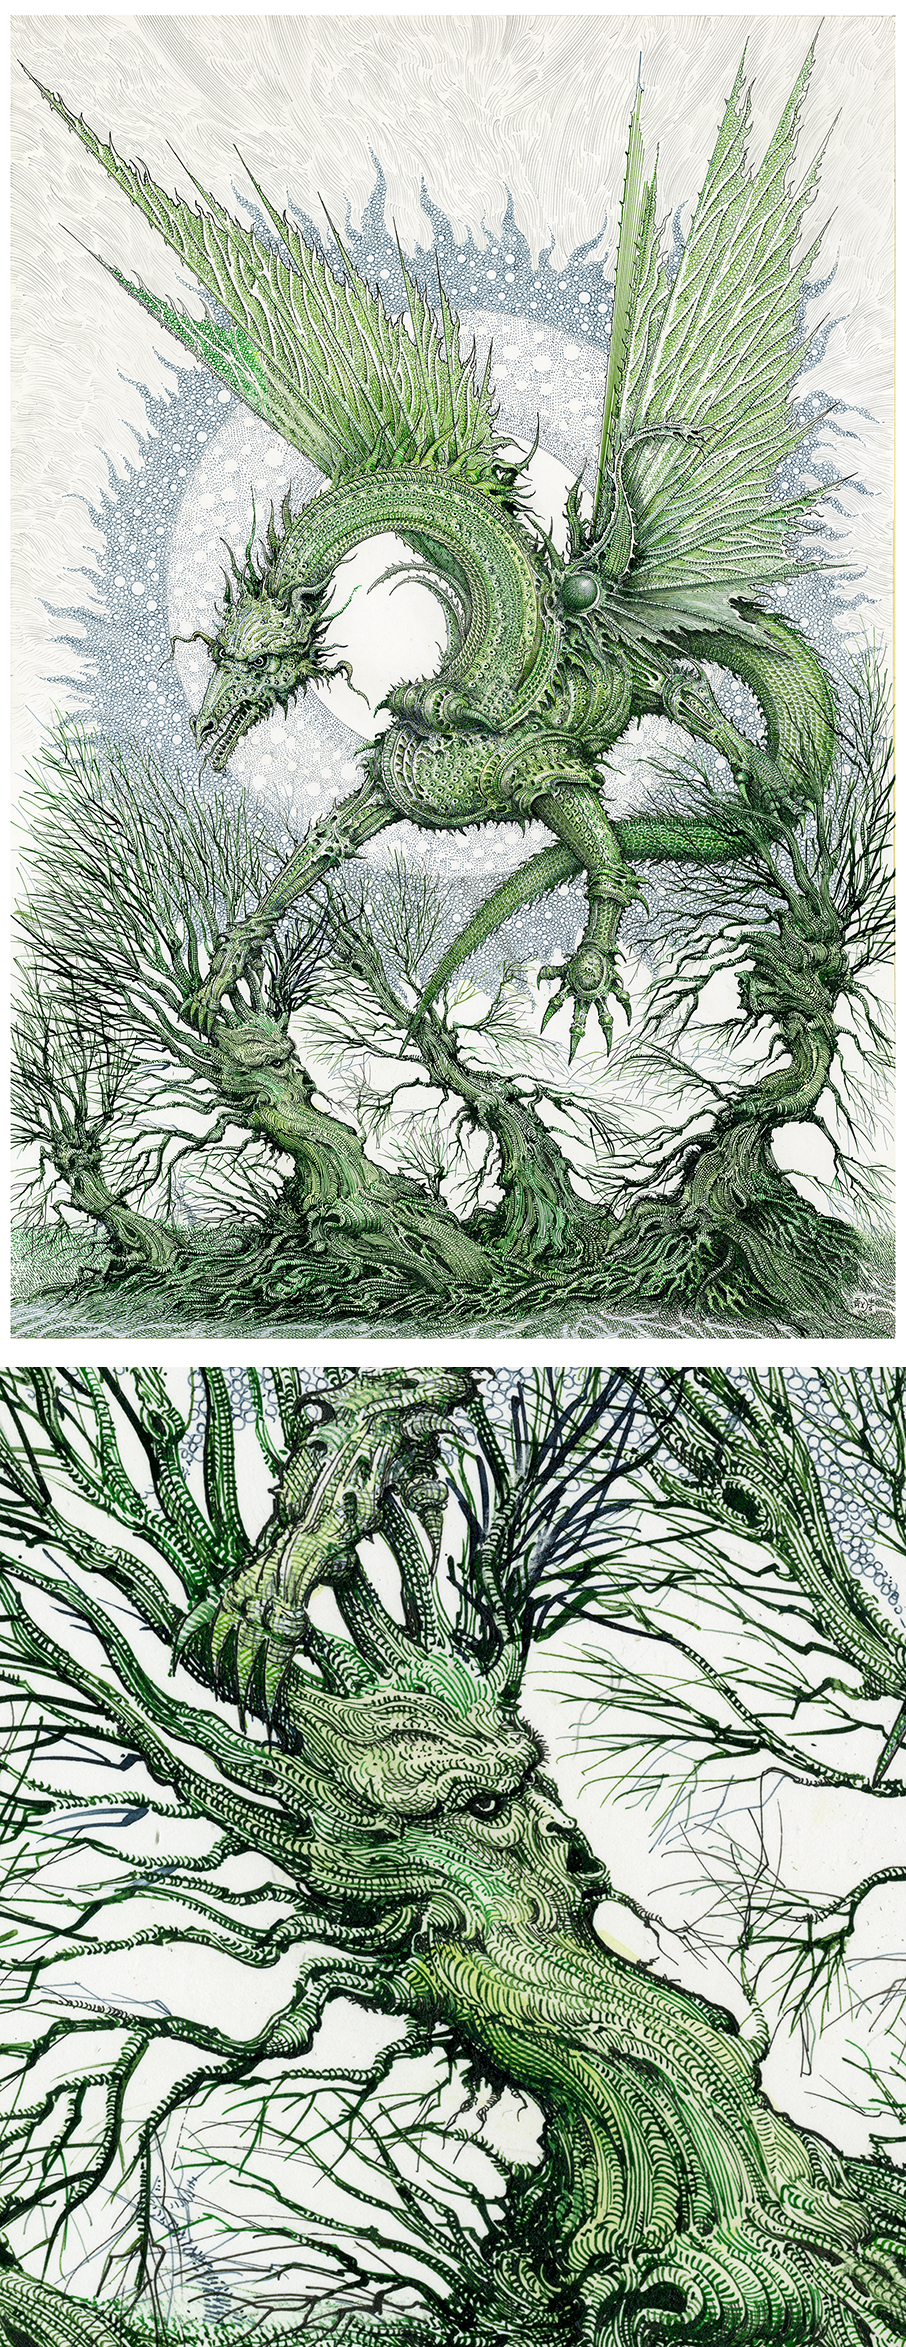 Ian Miller | Quoll, the White Dragon